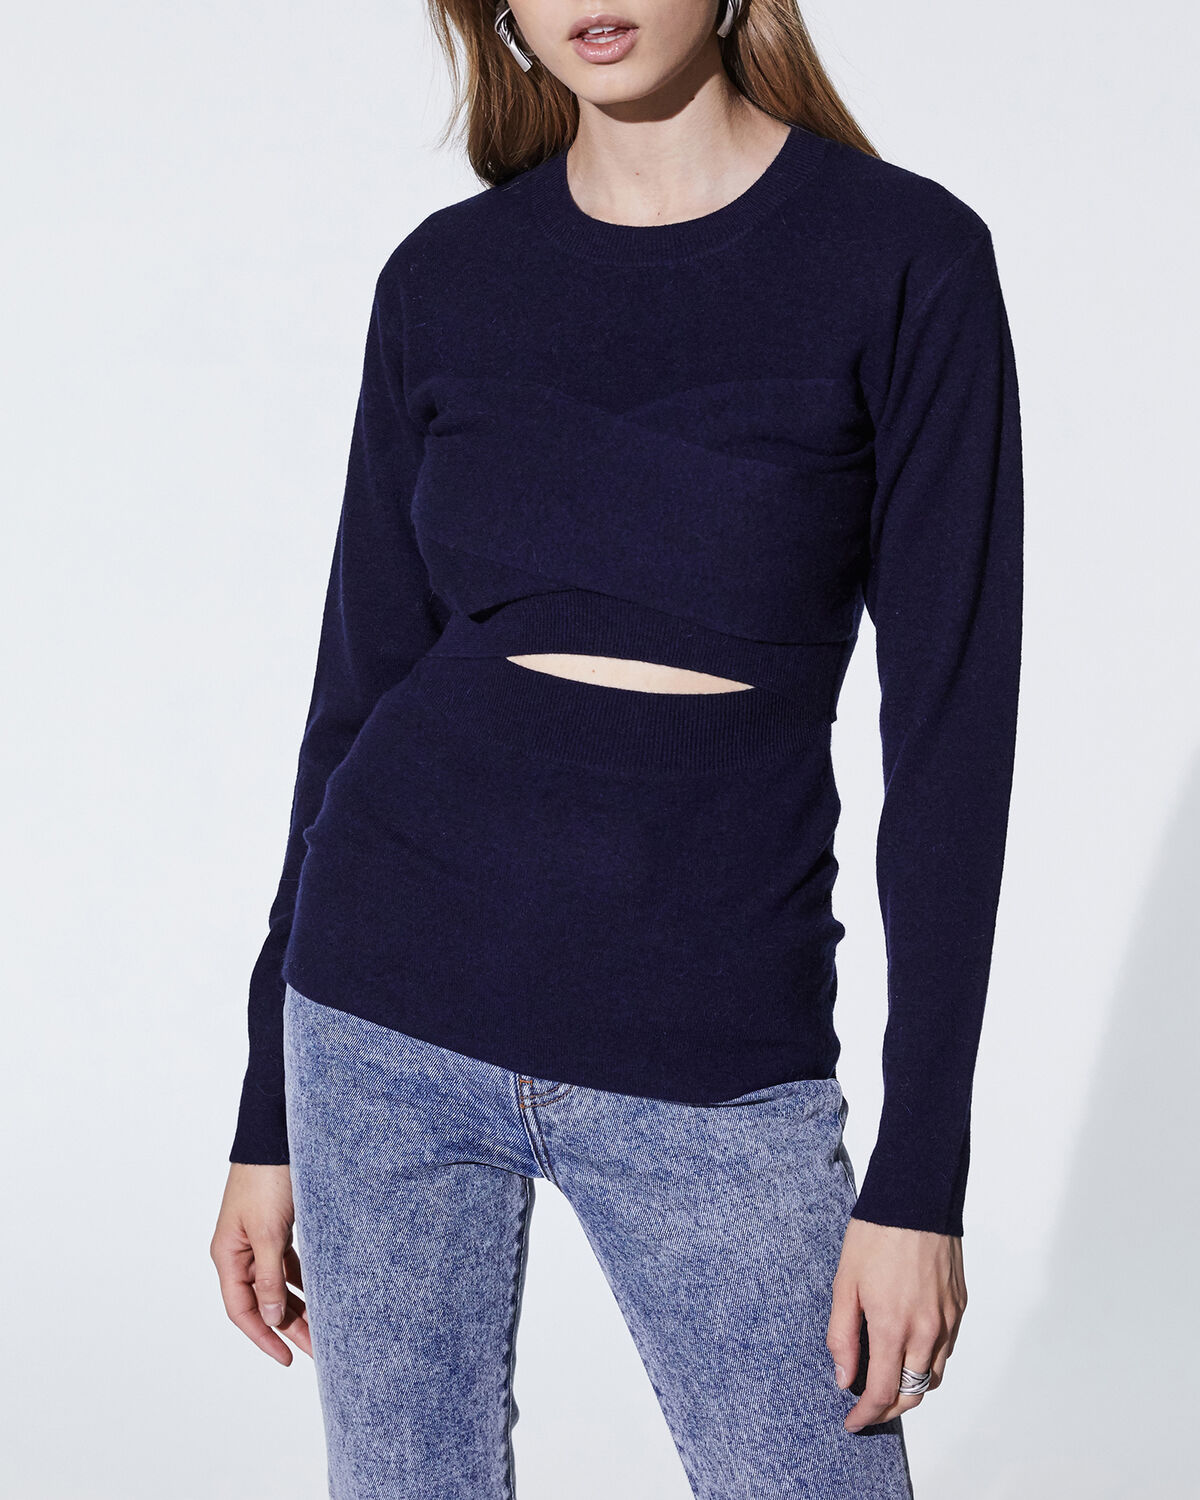 Photo of IRO Paris Denny Sweater Dark Blue - This Sweater Mixes Wool And Cashmere Is Worn Close To The Body. It Is Distinguished By Its Marked Shoulders And Draped Details. Its Plus? It Will Subtly Reveal Your Skin For A Resolutely Feminine And Glamorous Silhouette. Fall Winter 19